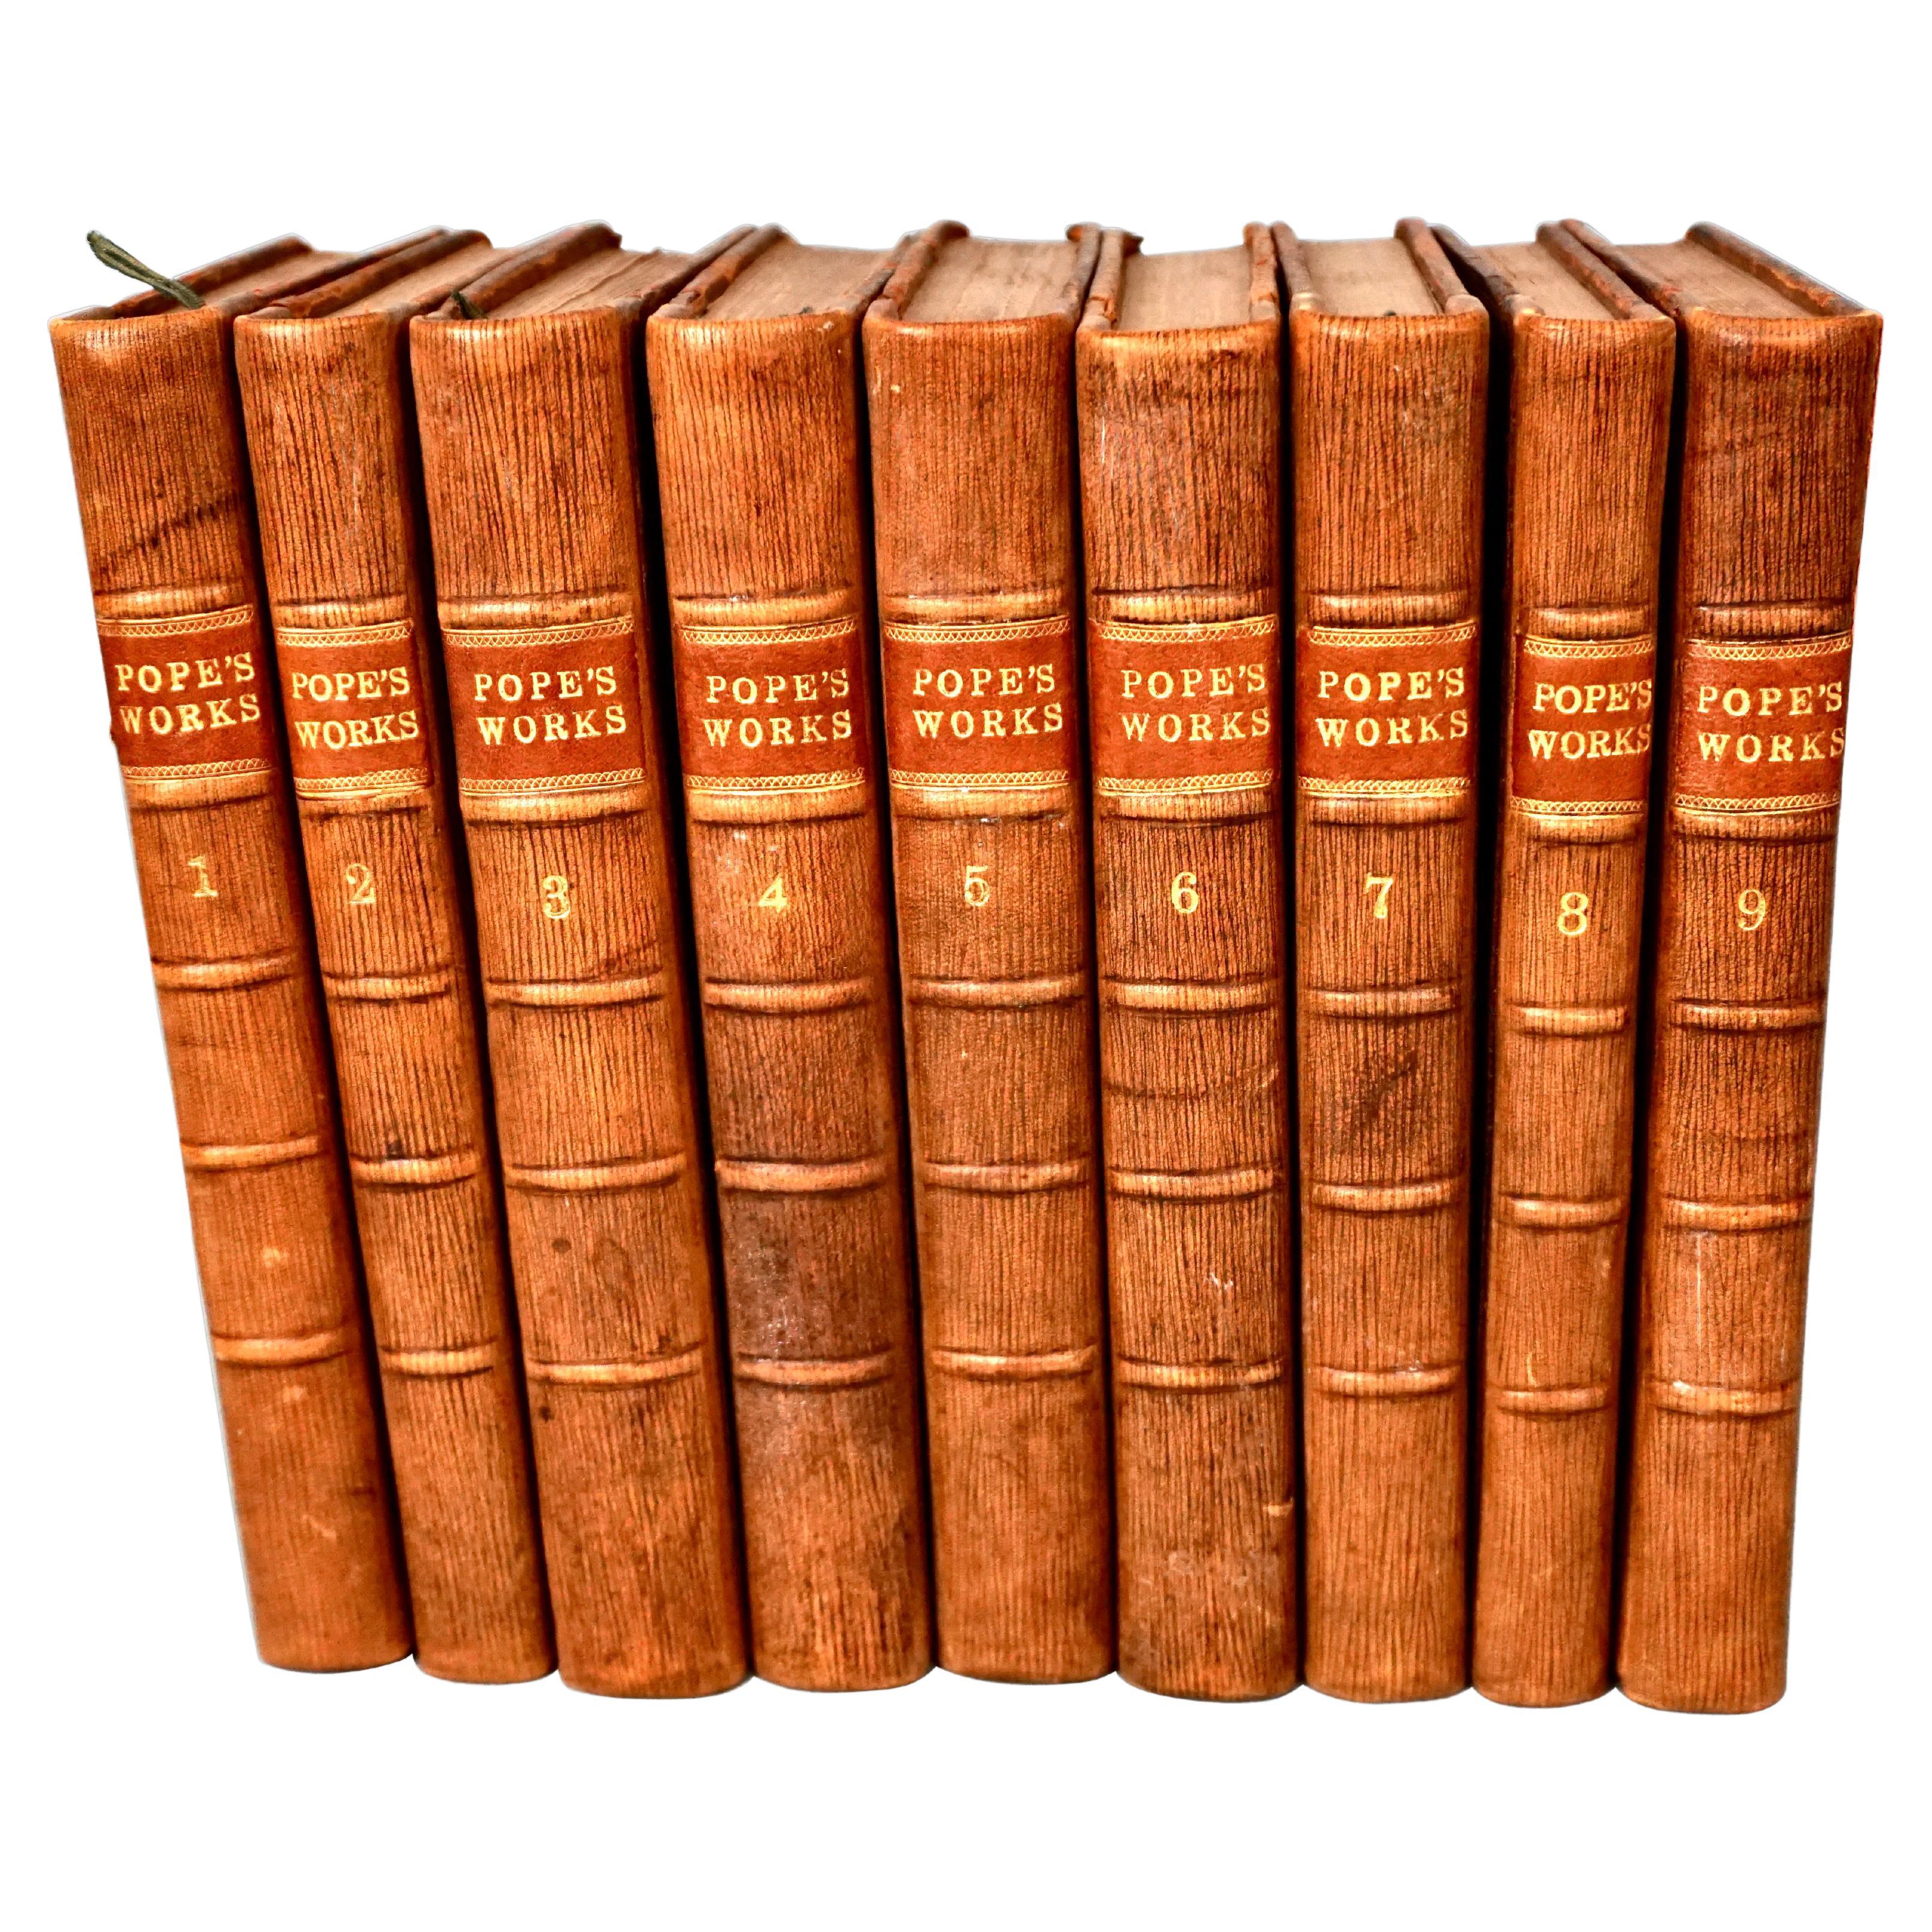 Works of Alexander Pope Leatherbound in 9 Volumes Published 1757 For Sale